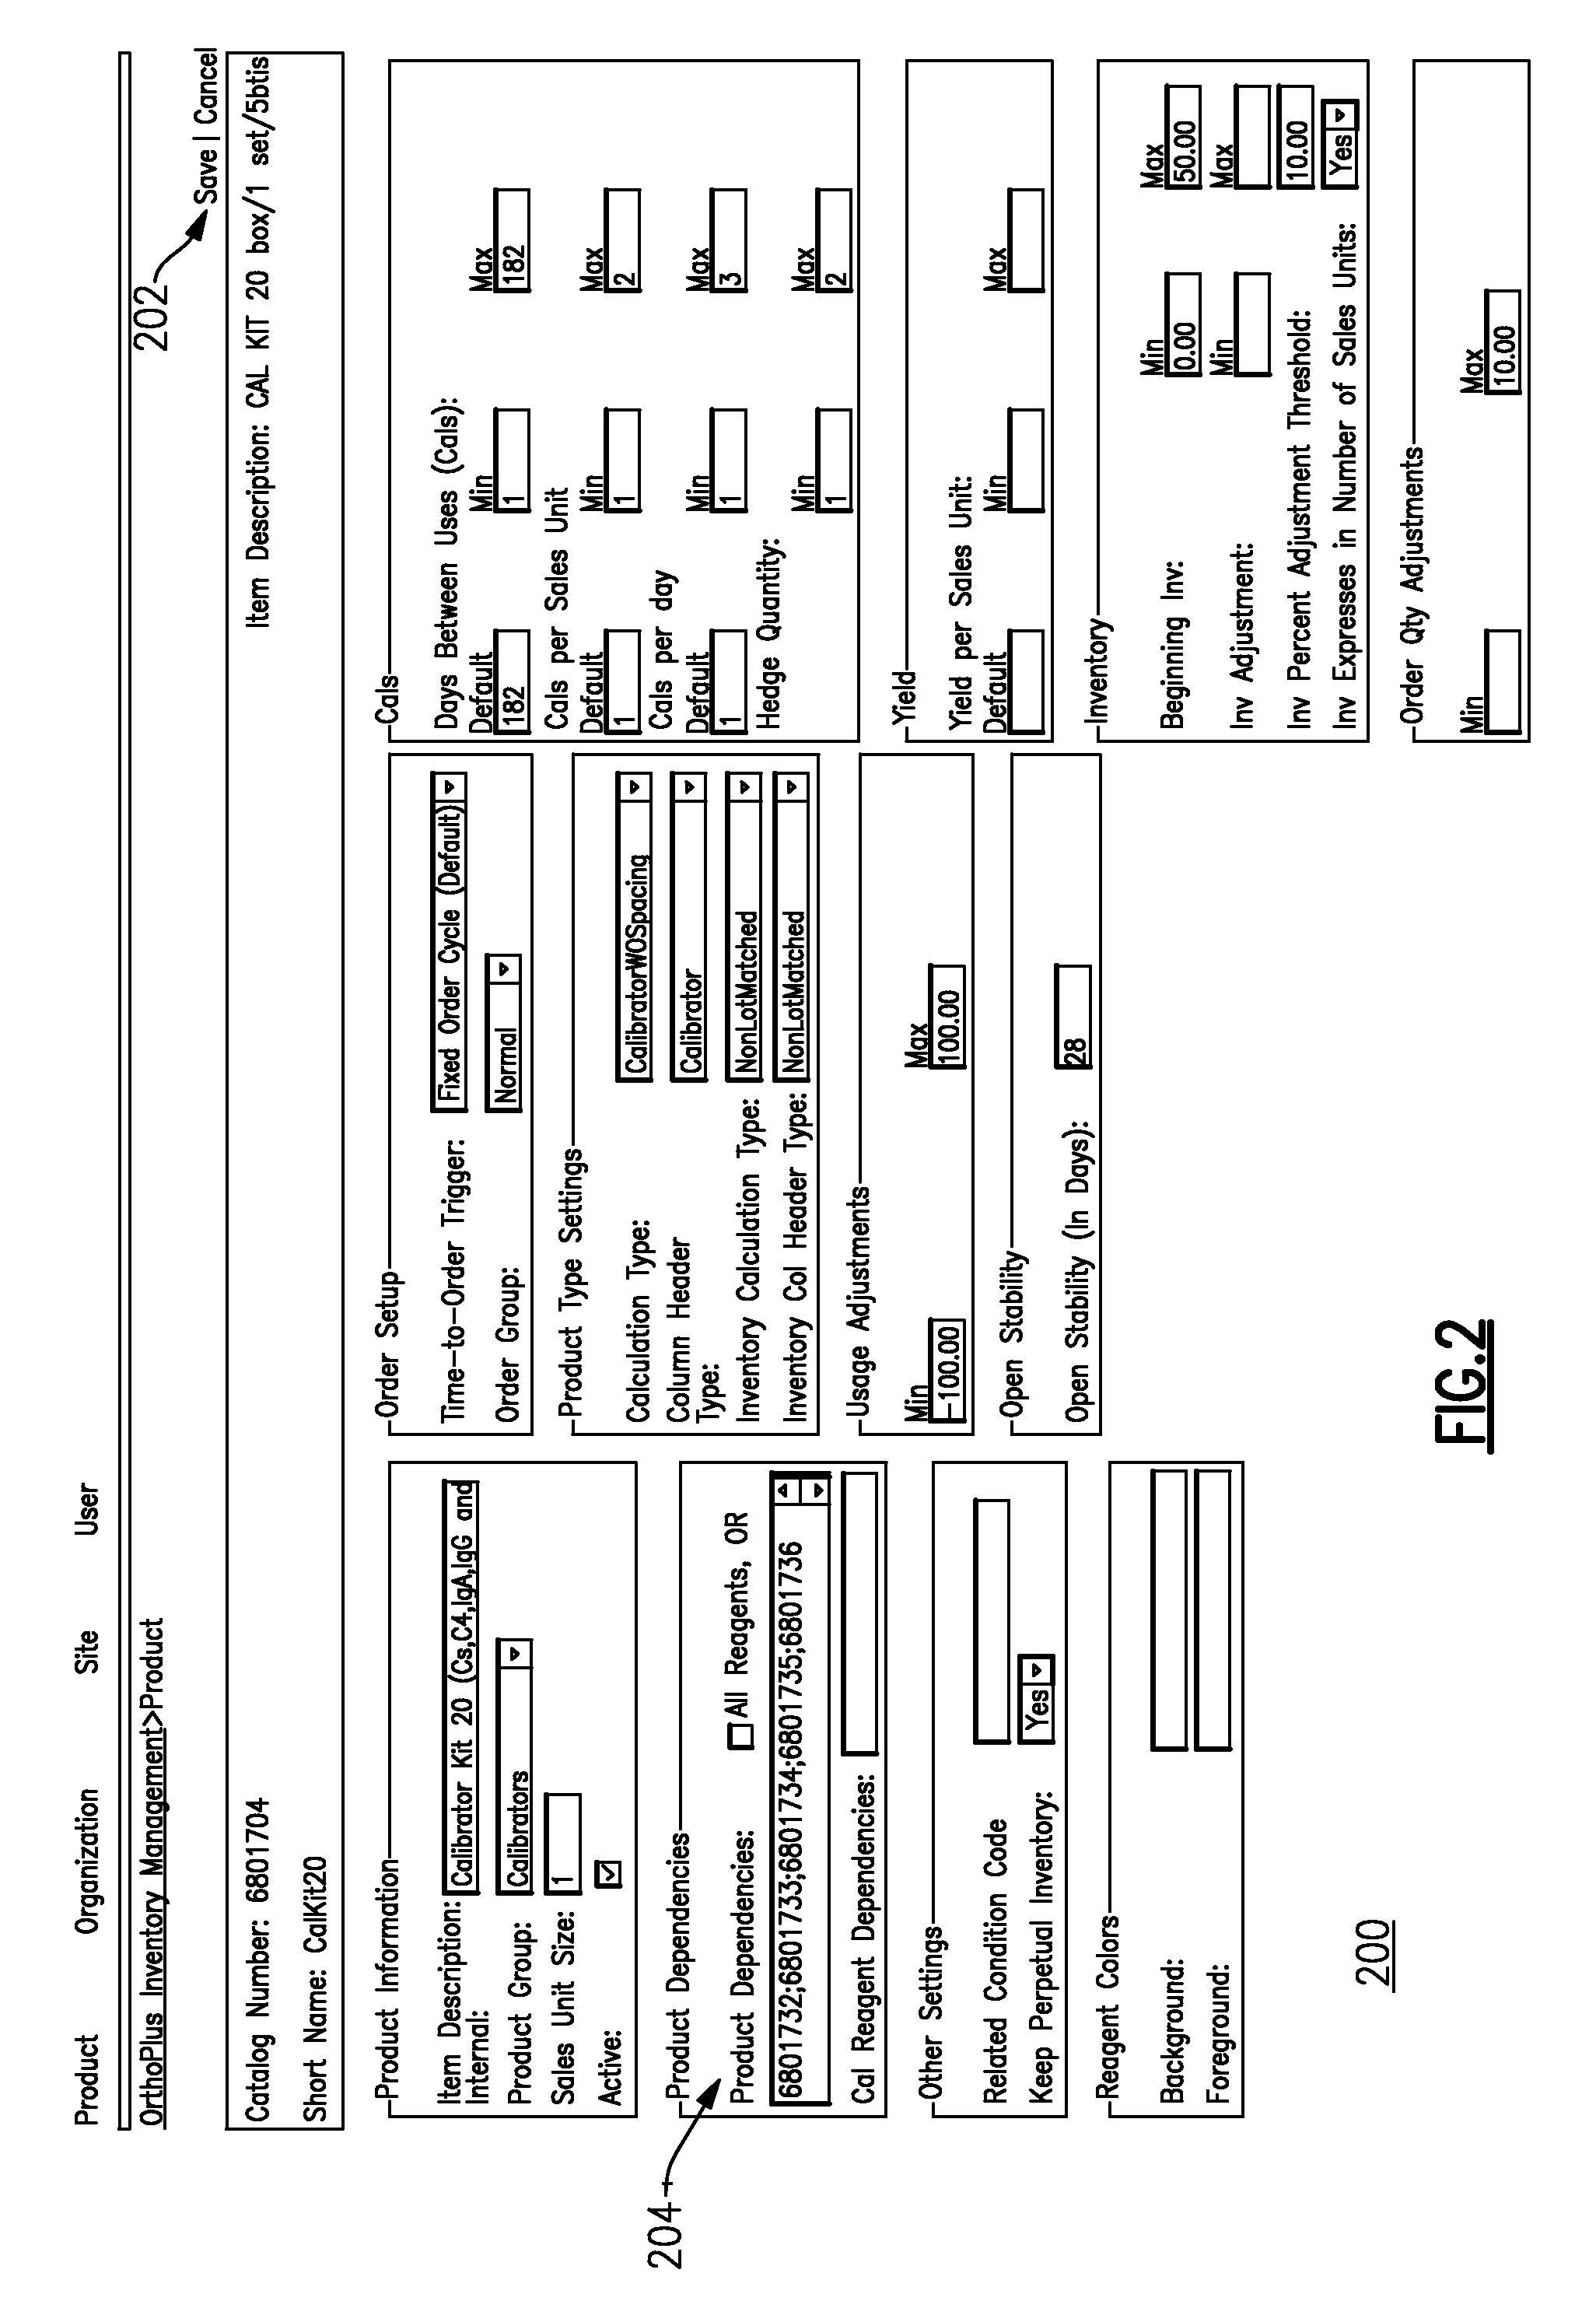 System and method of inventory management